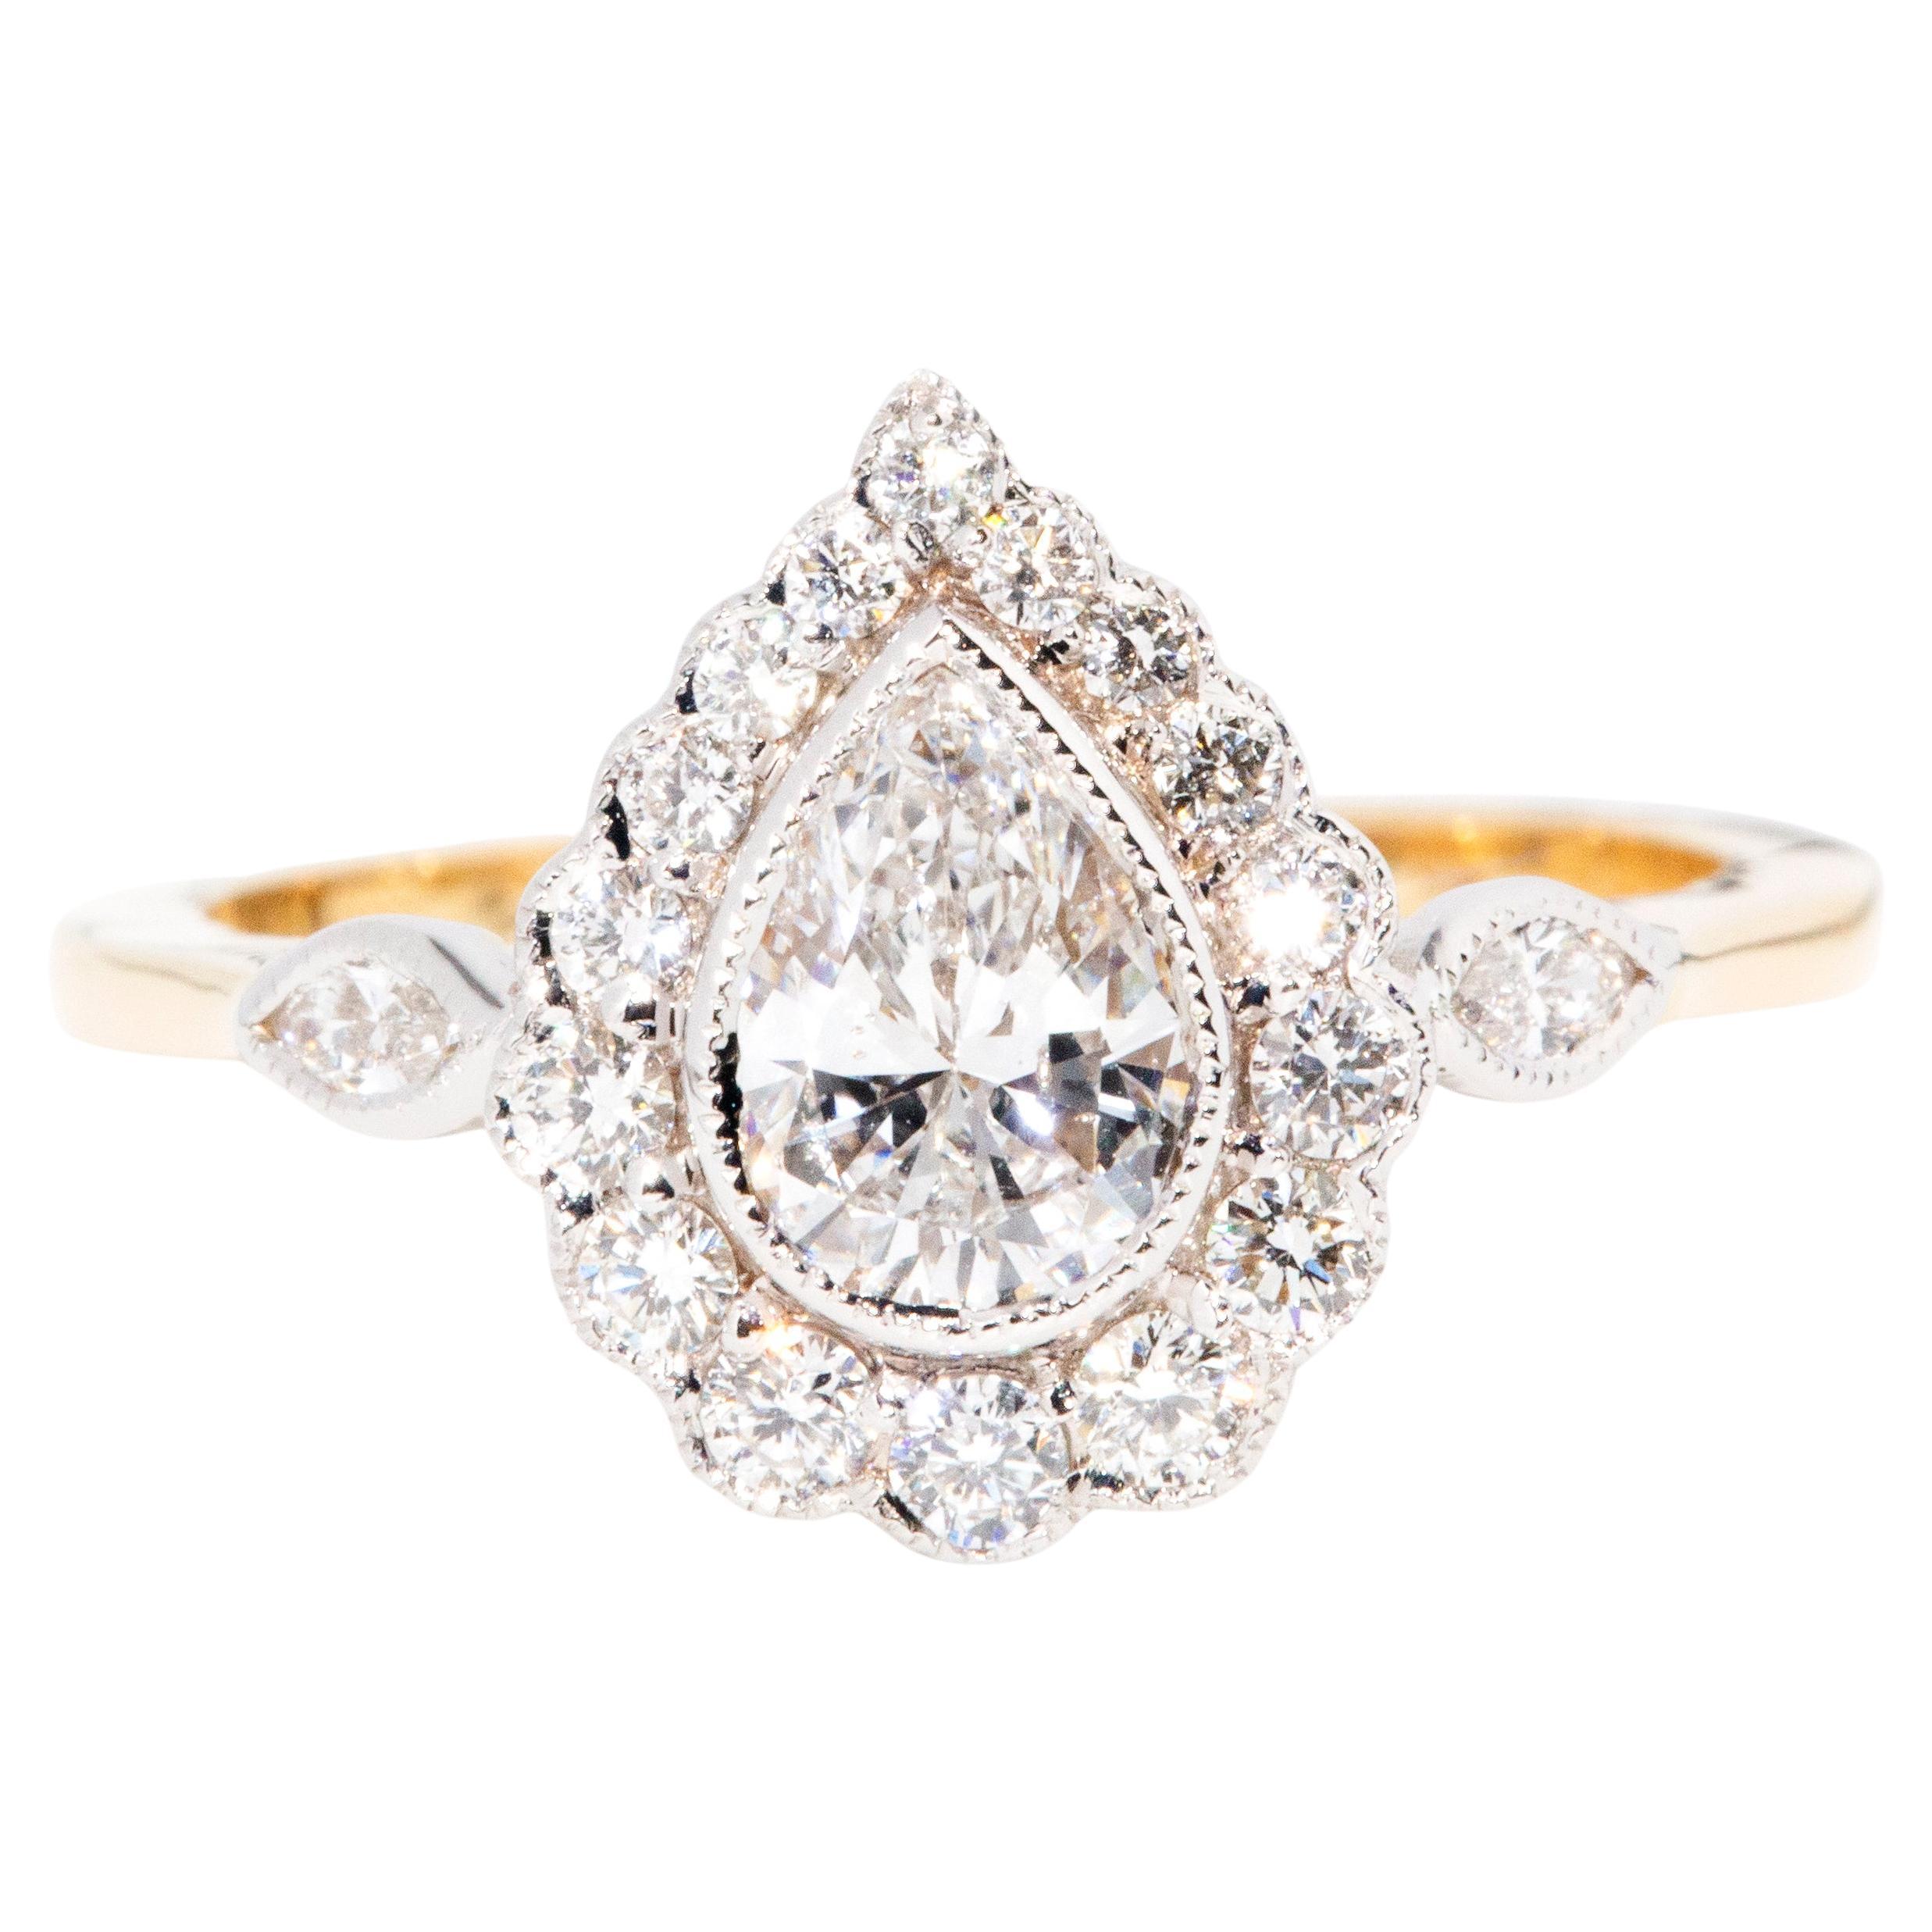 Contemporary ADGL 0.97 Carat Certified Pear Shaped Diamond Halo Cluster Ring For Sale